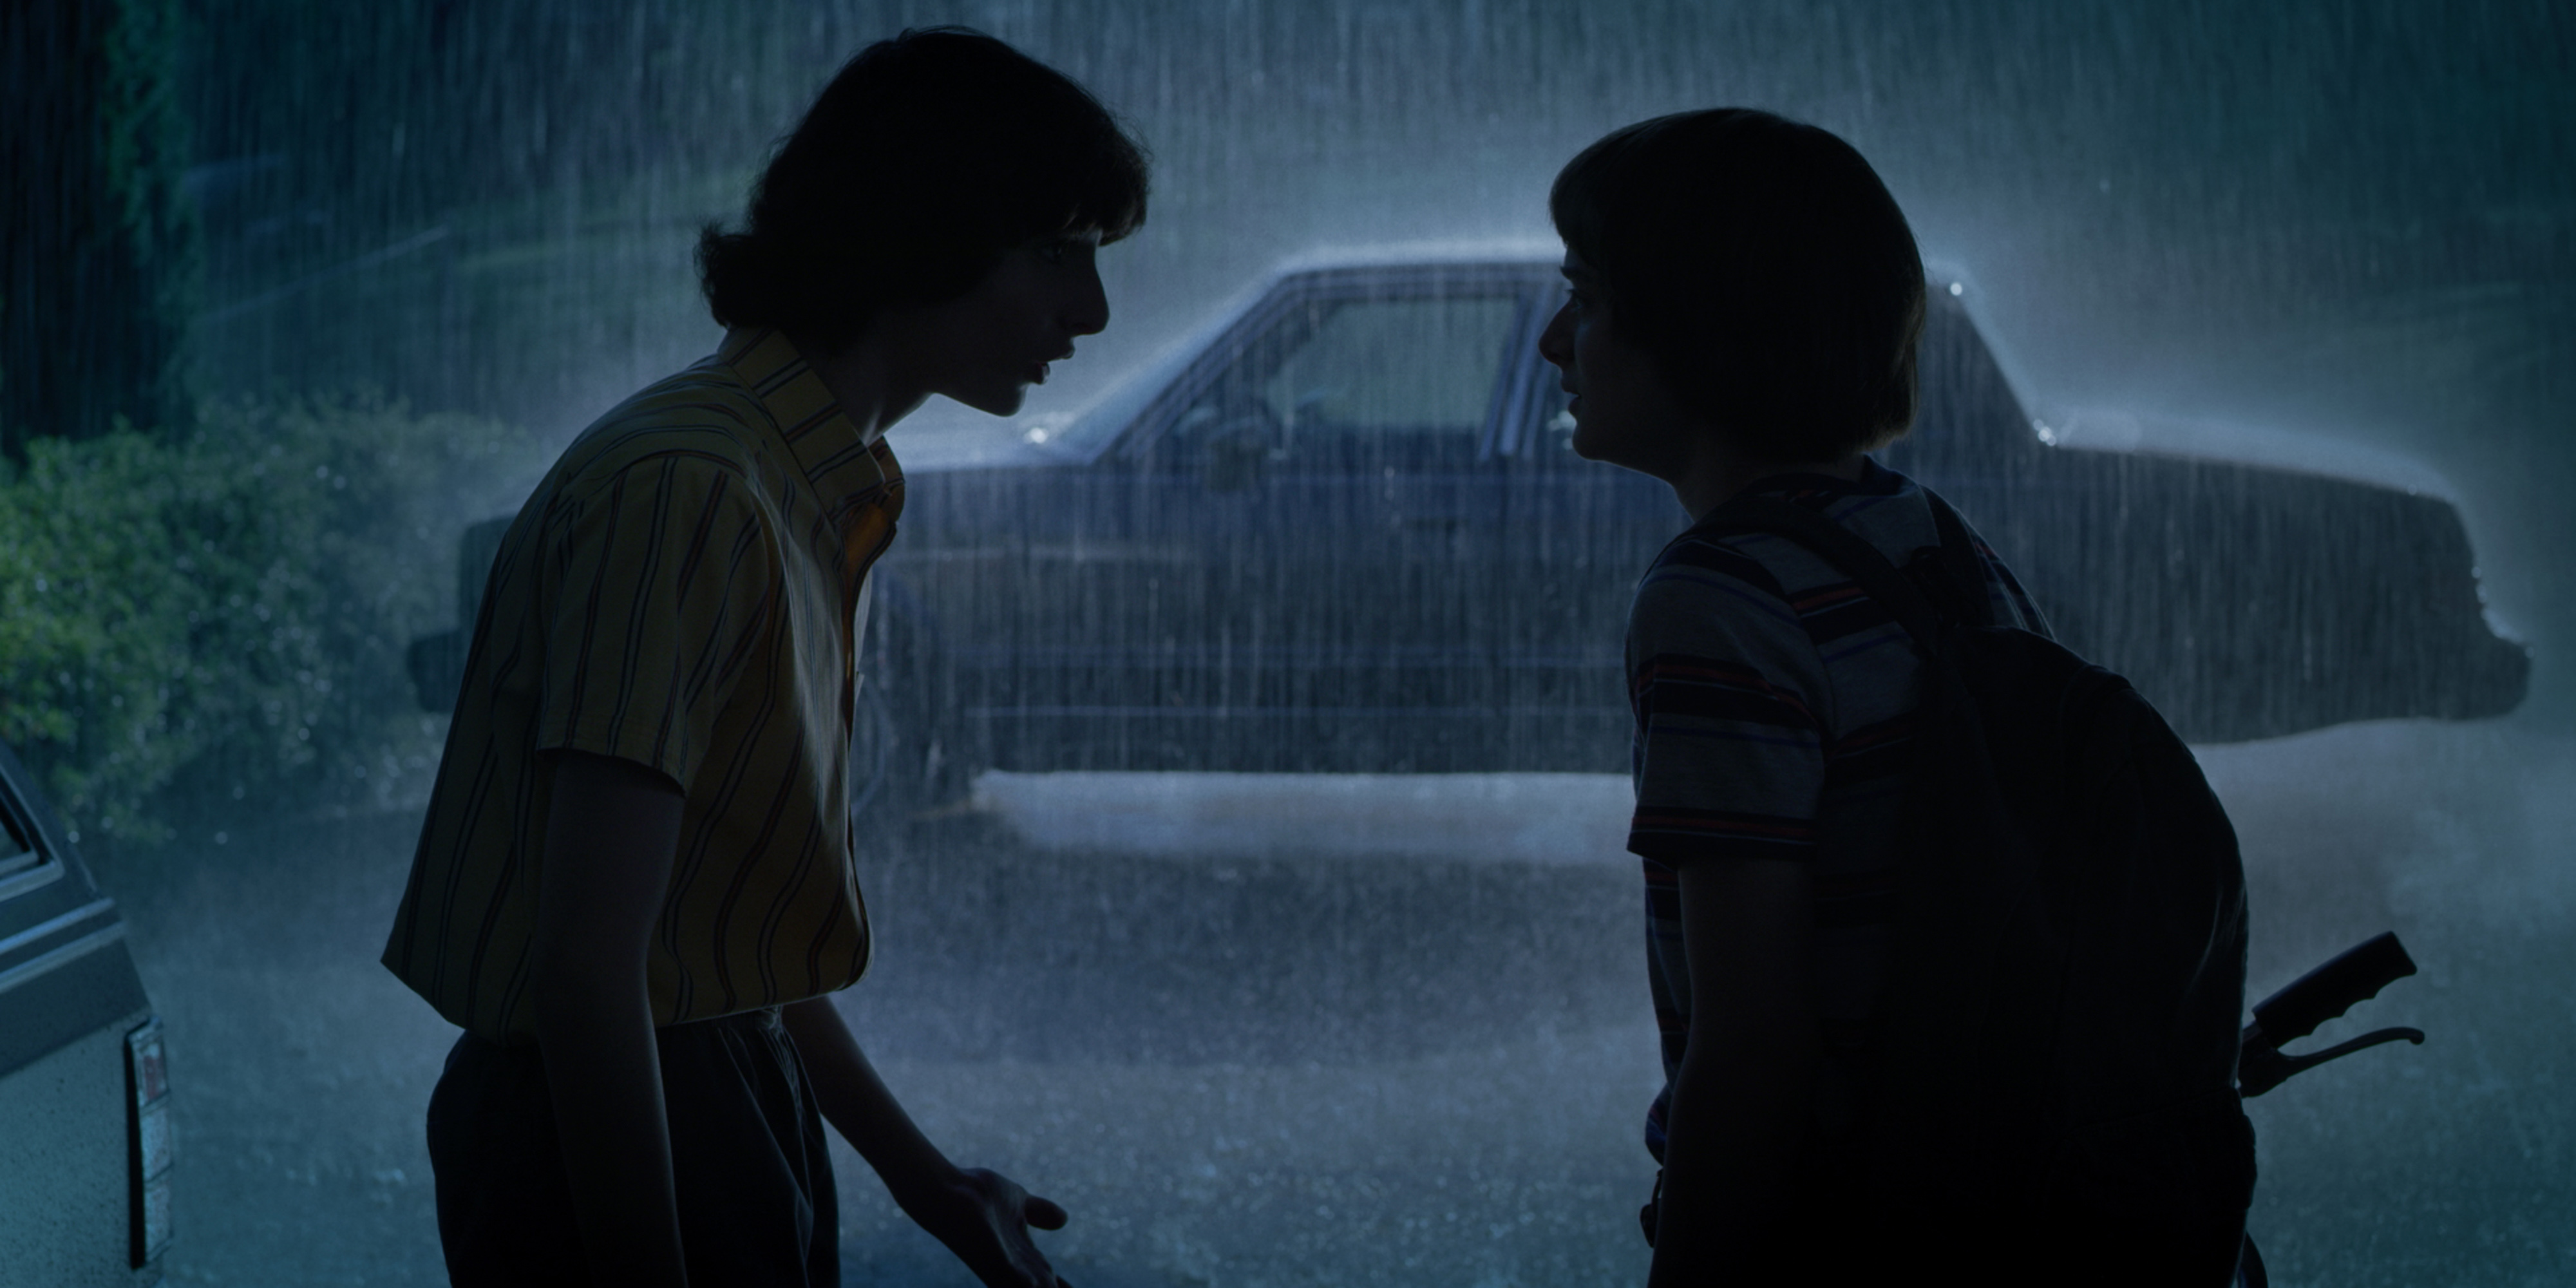 Mike (Finn Wolfhard) and Will (Noach Schnapp) talk about their relationship in 'Stranger Things' Season 3